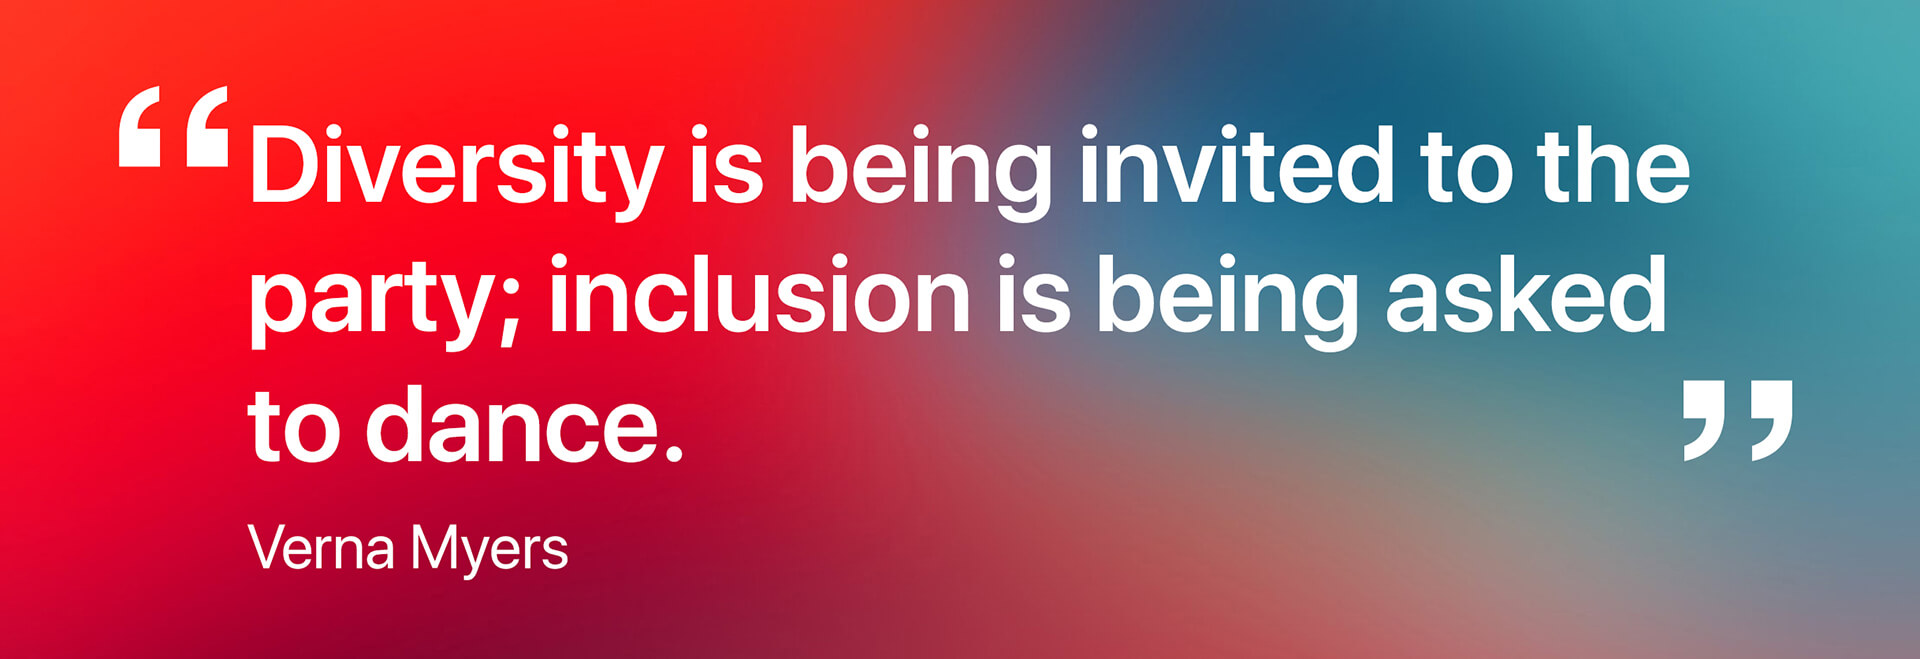 Verna Myers's quote for Diversity & Inclusion